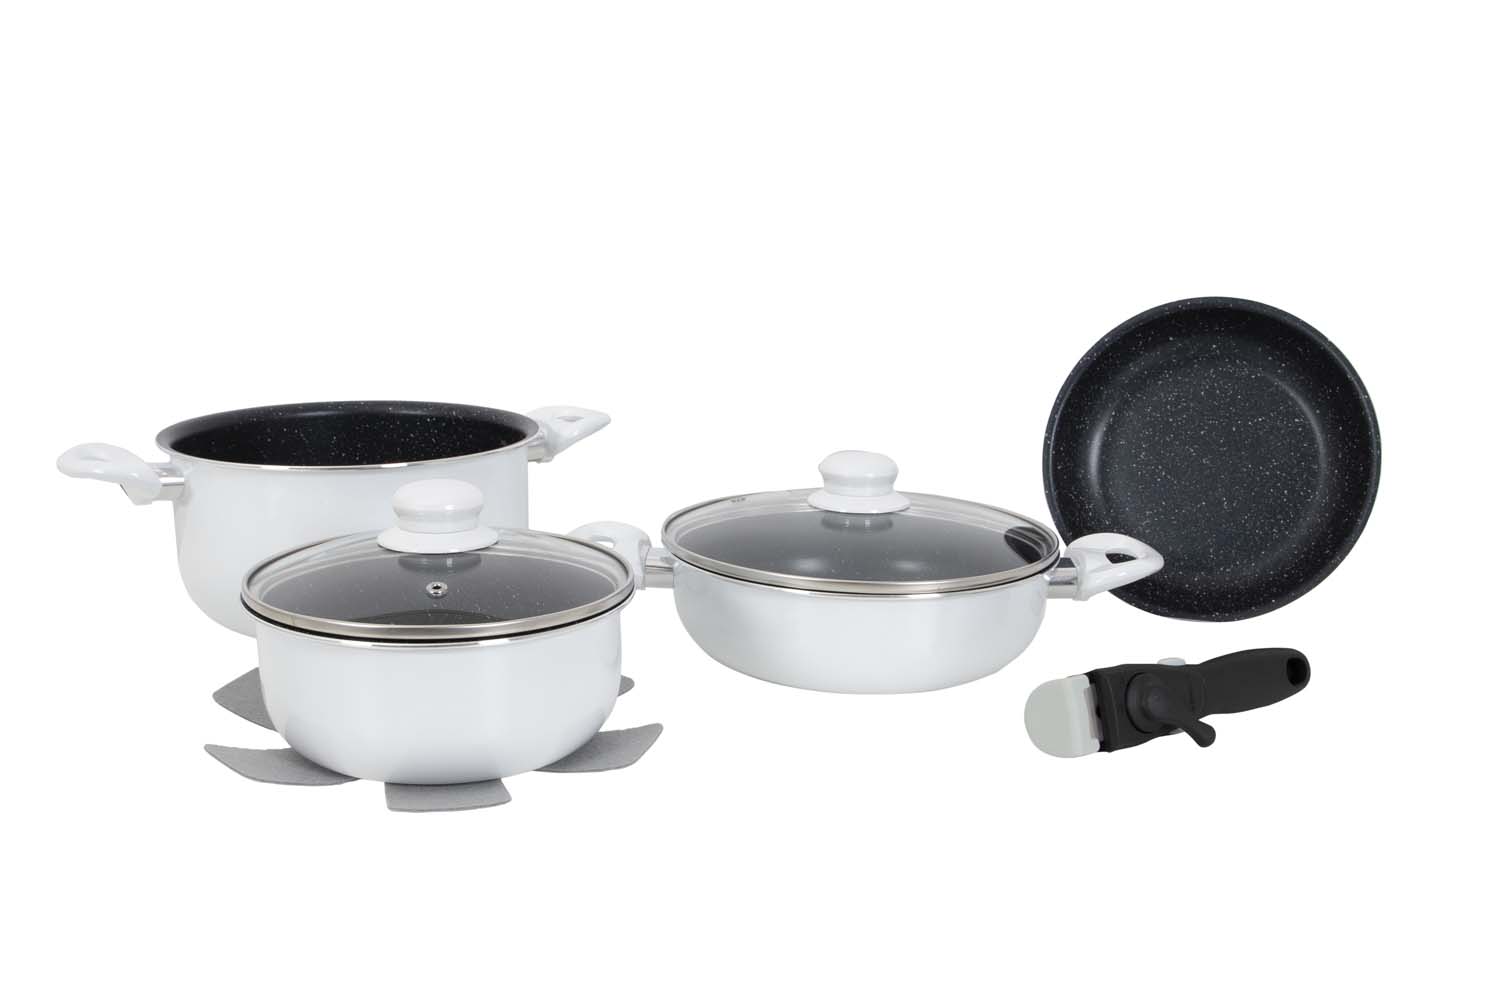 6977221 A 7-piece white pan set. Extremely suitable for induction hobs. Ideal for the caravan, camper but also for at home. With sturdy 3-layer non-stick coating. This set consists of: 3 saucepans Ø 24 cm - 4 L, Ø 23,5 cm - 2,2 L, Ø 19,5 cm - 1,7 L. Pan Ø 21,5 cm, and 2 lids Ø 23,5 and Ø 19.5 cm. In addition, this set is equipped with a safety handle with locking function. Including 3 pan protectors made from vilt.